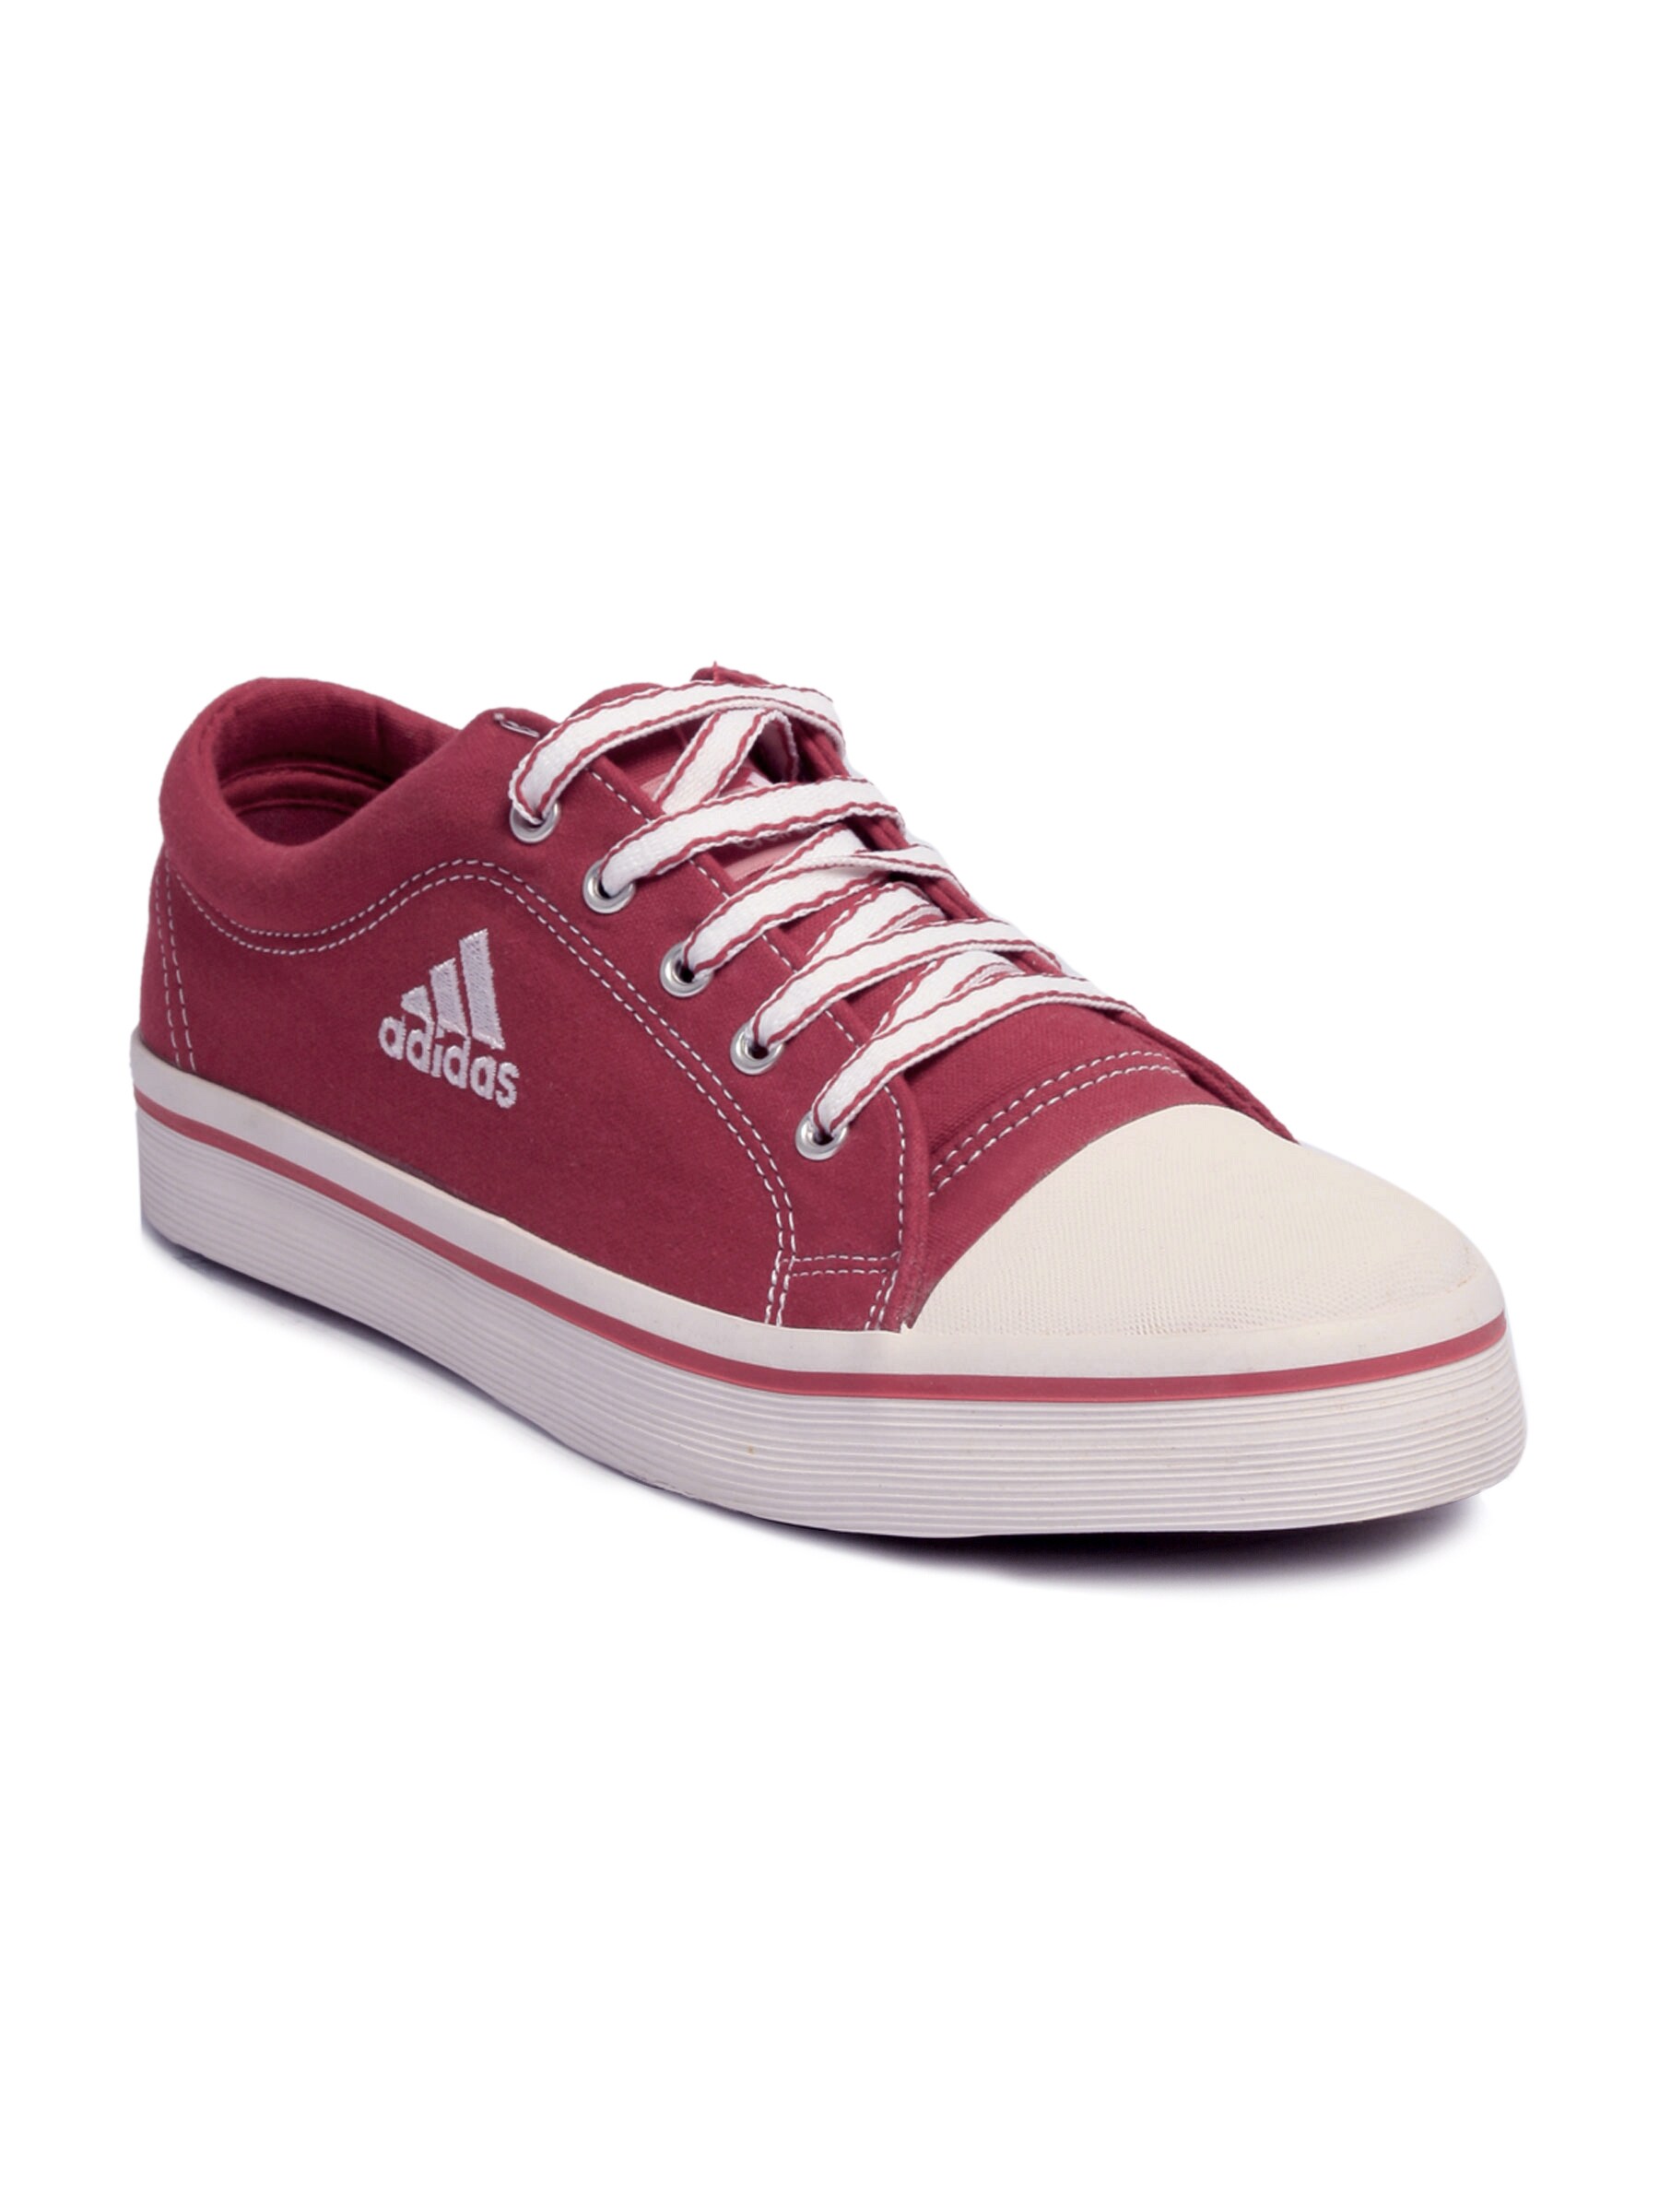 ADIDAS Men Addcash Red Casual Shoes